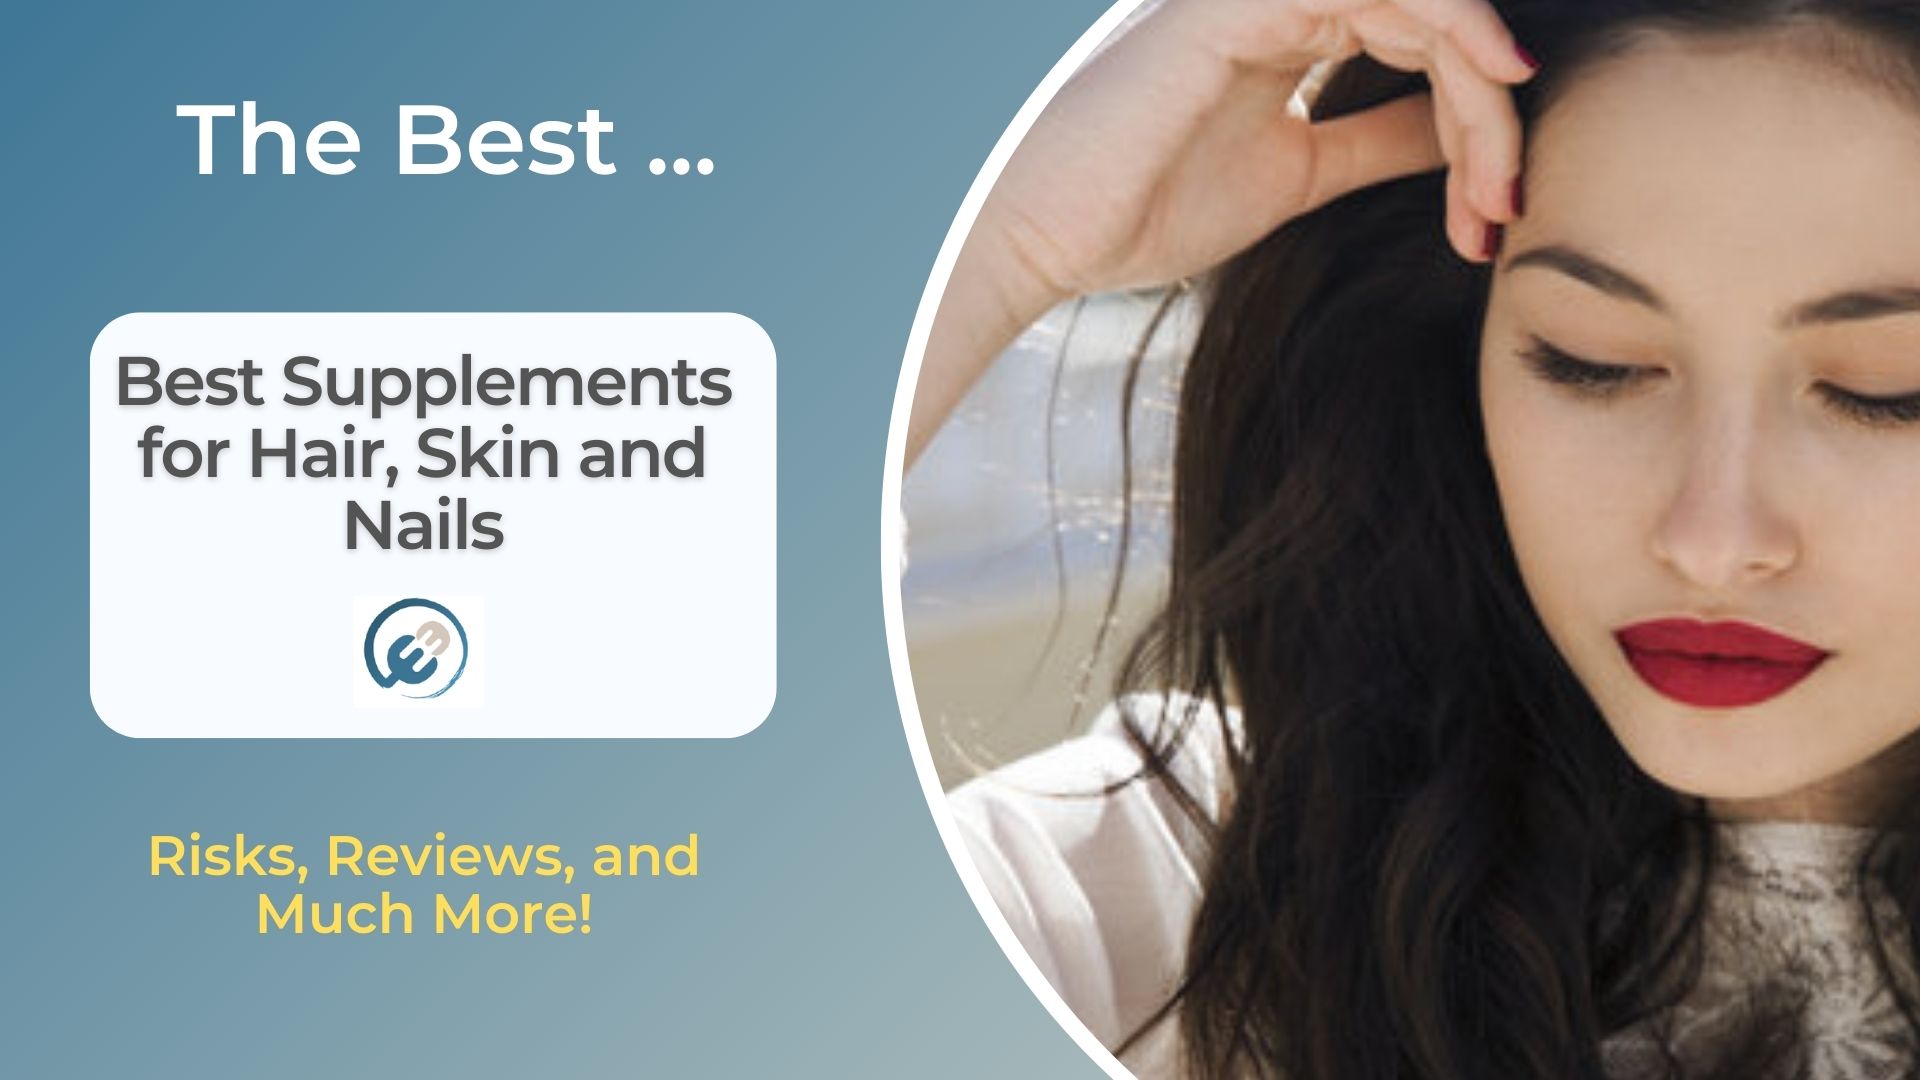 Best Supplements for Hair, Skin and Nails